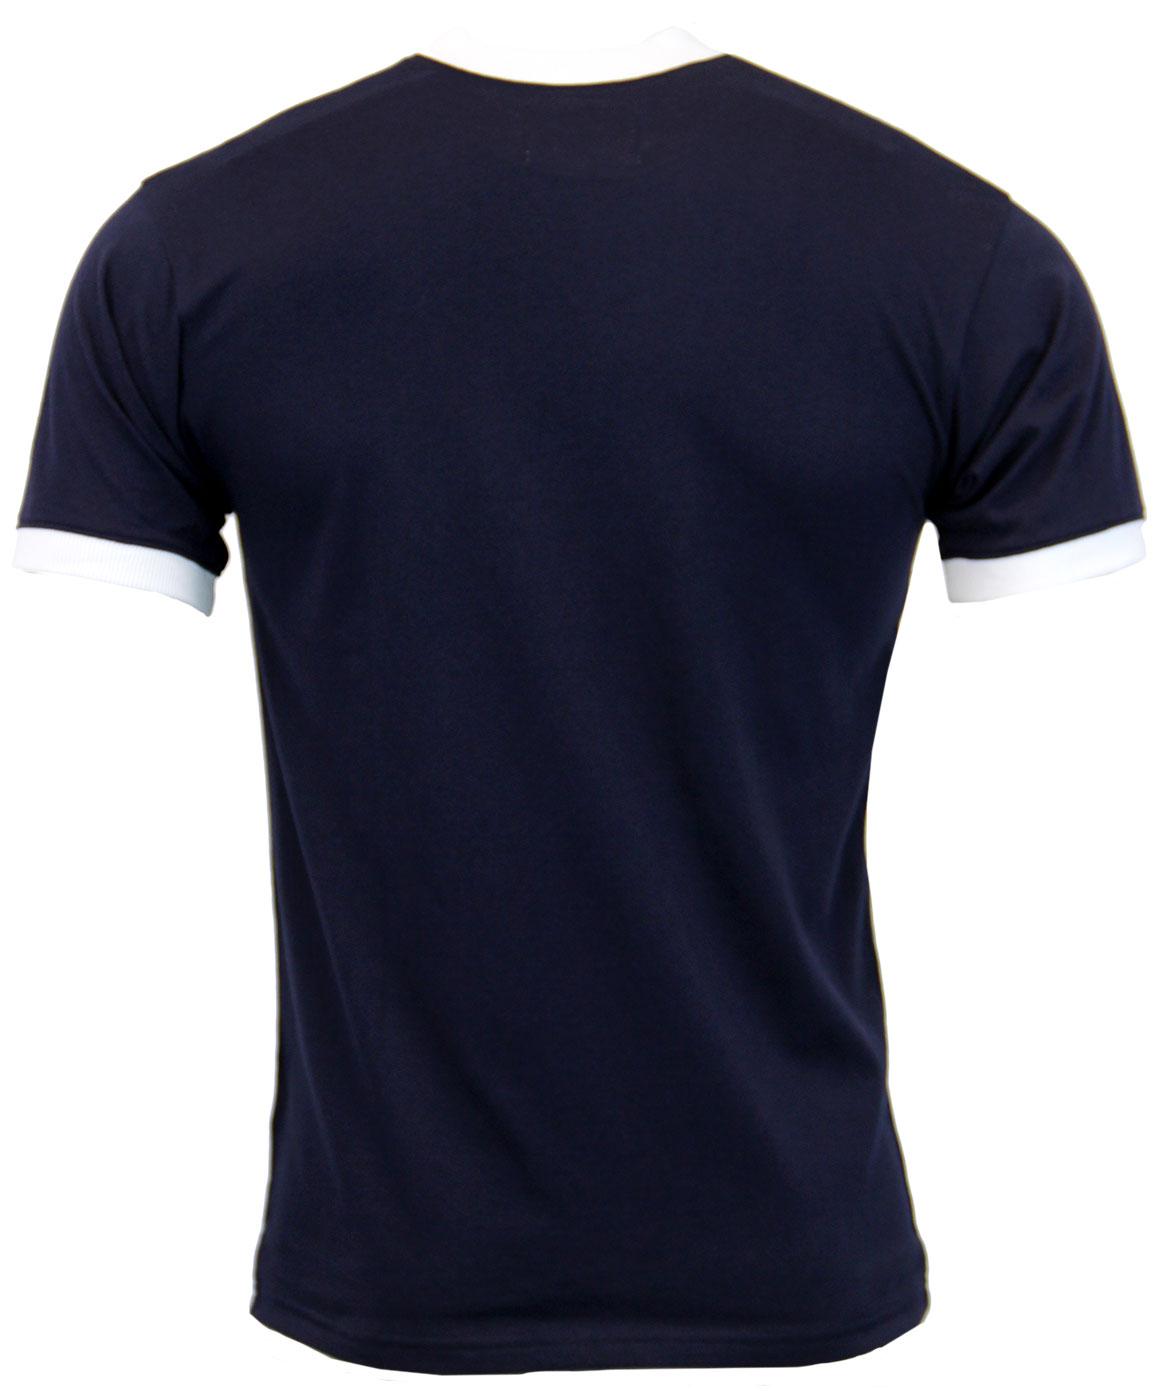 BRUTUS Ringer Retro Contrast Tipped Jersey T-Shirt in Navy